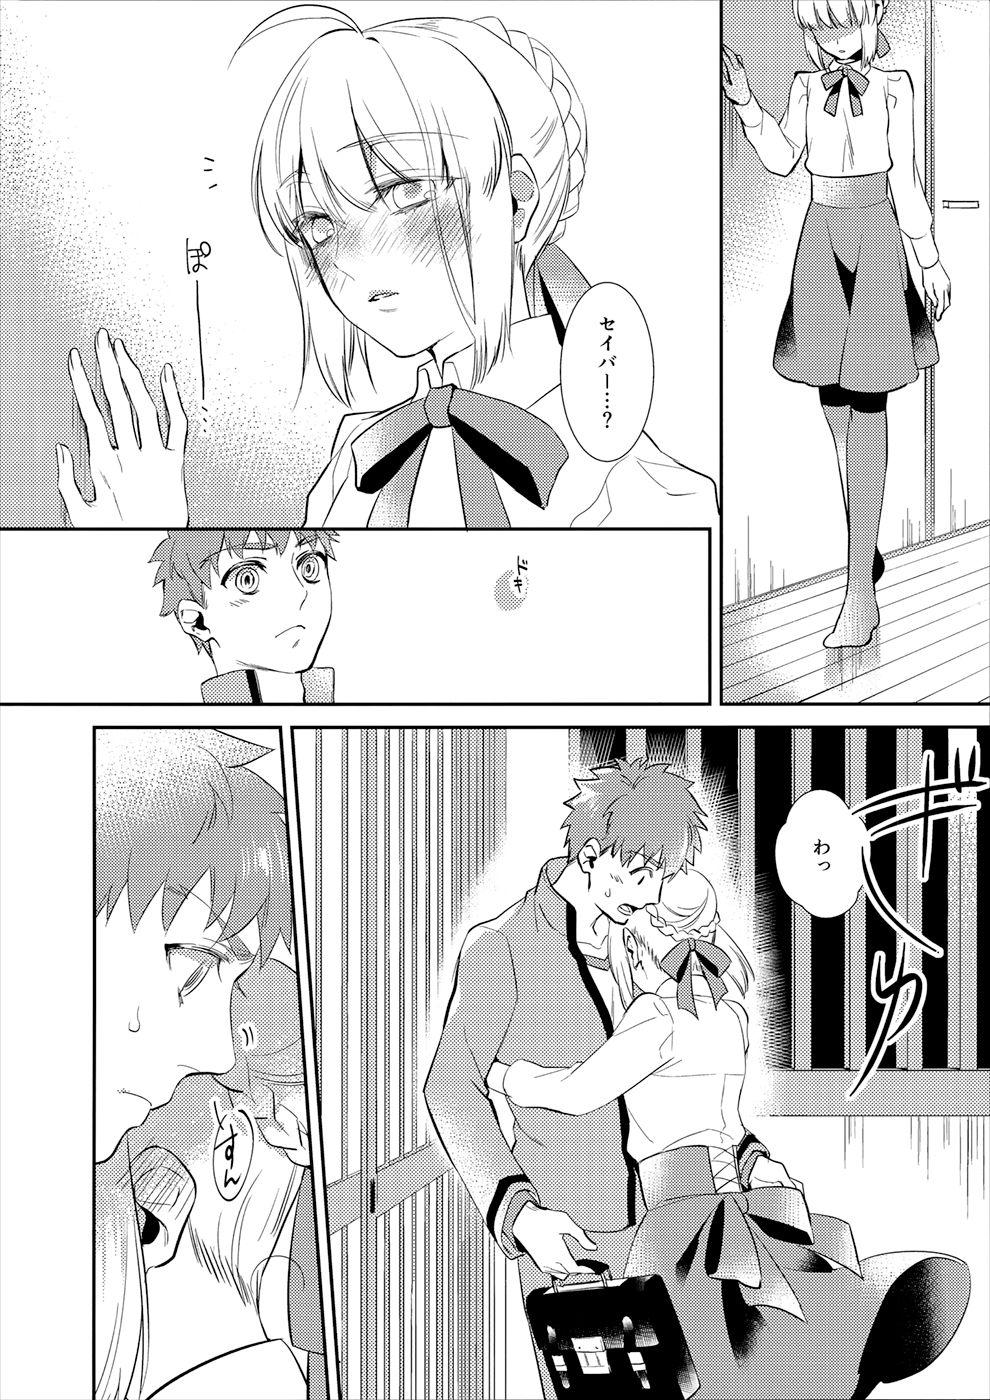 Foreplay Nonde Nomarete - Fate stay night Young Tits - Page 5